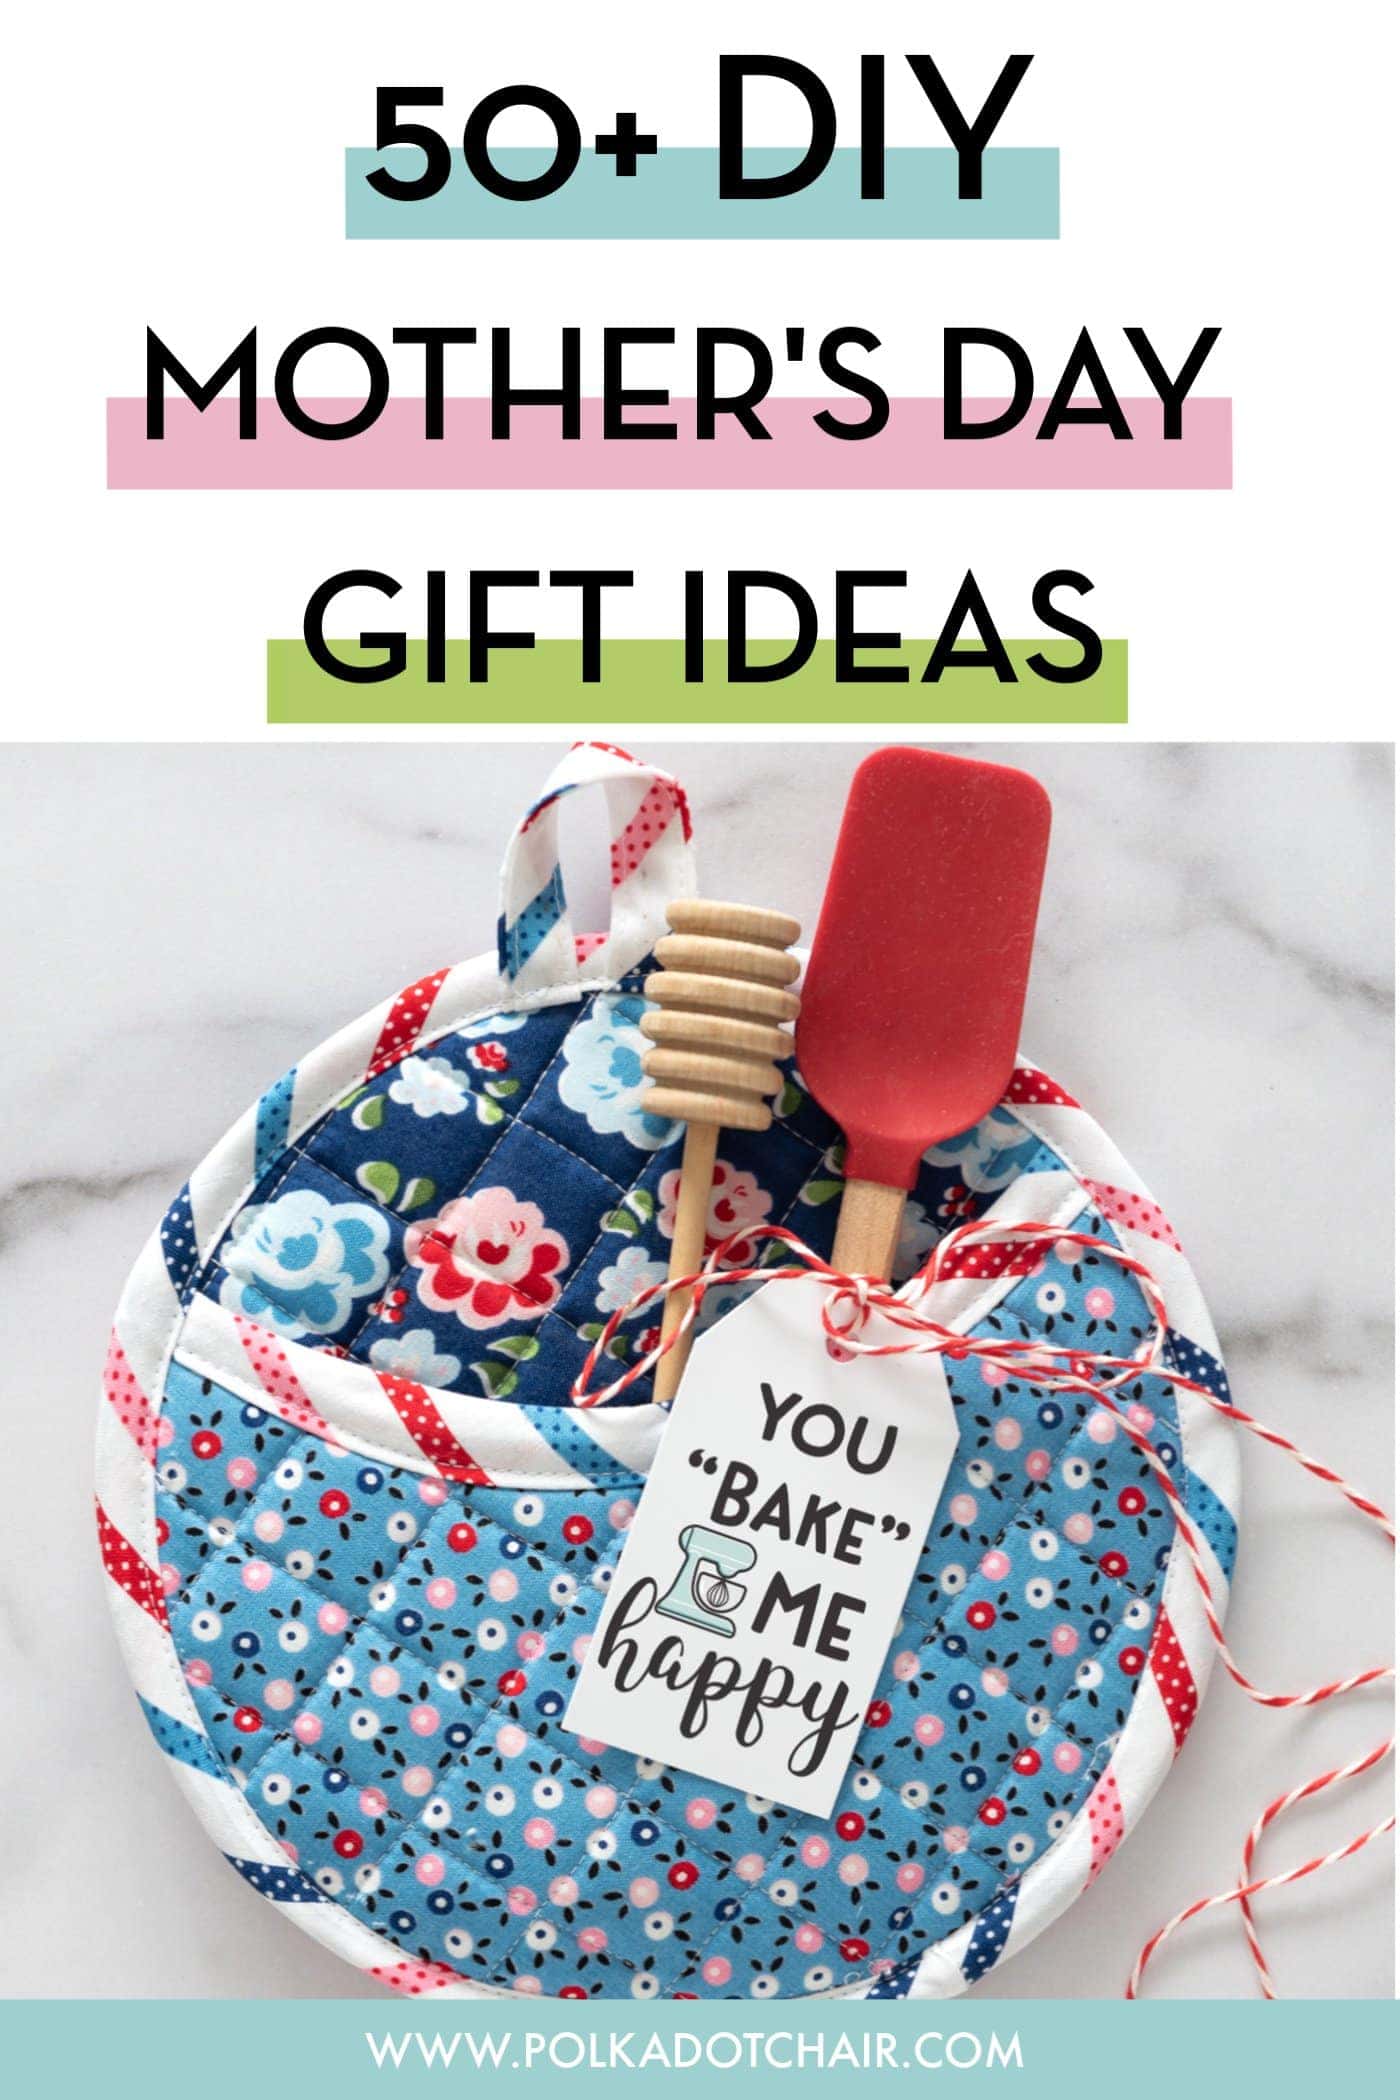 37+ Handmade Gift Ideas For Mom That She's Guaranteed To Love